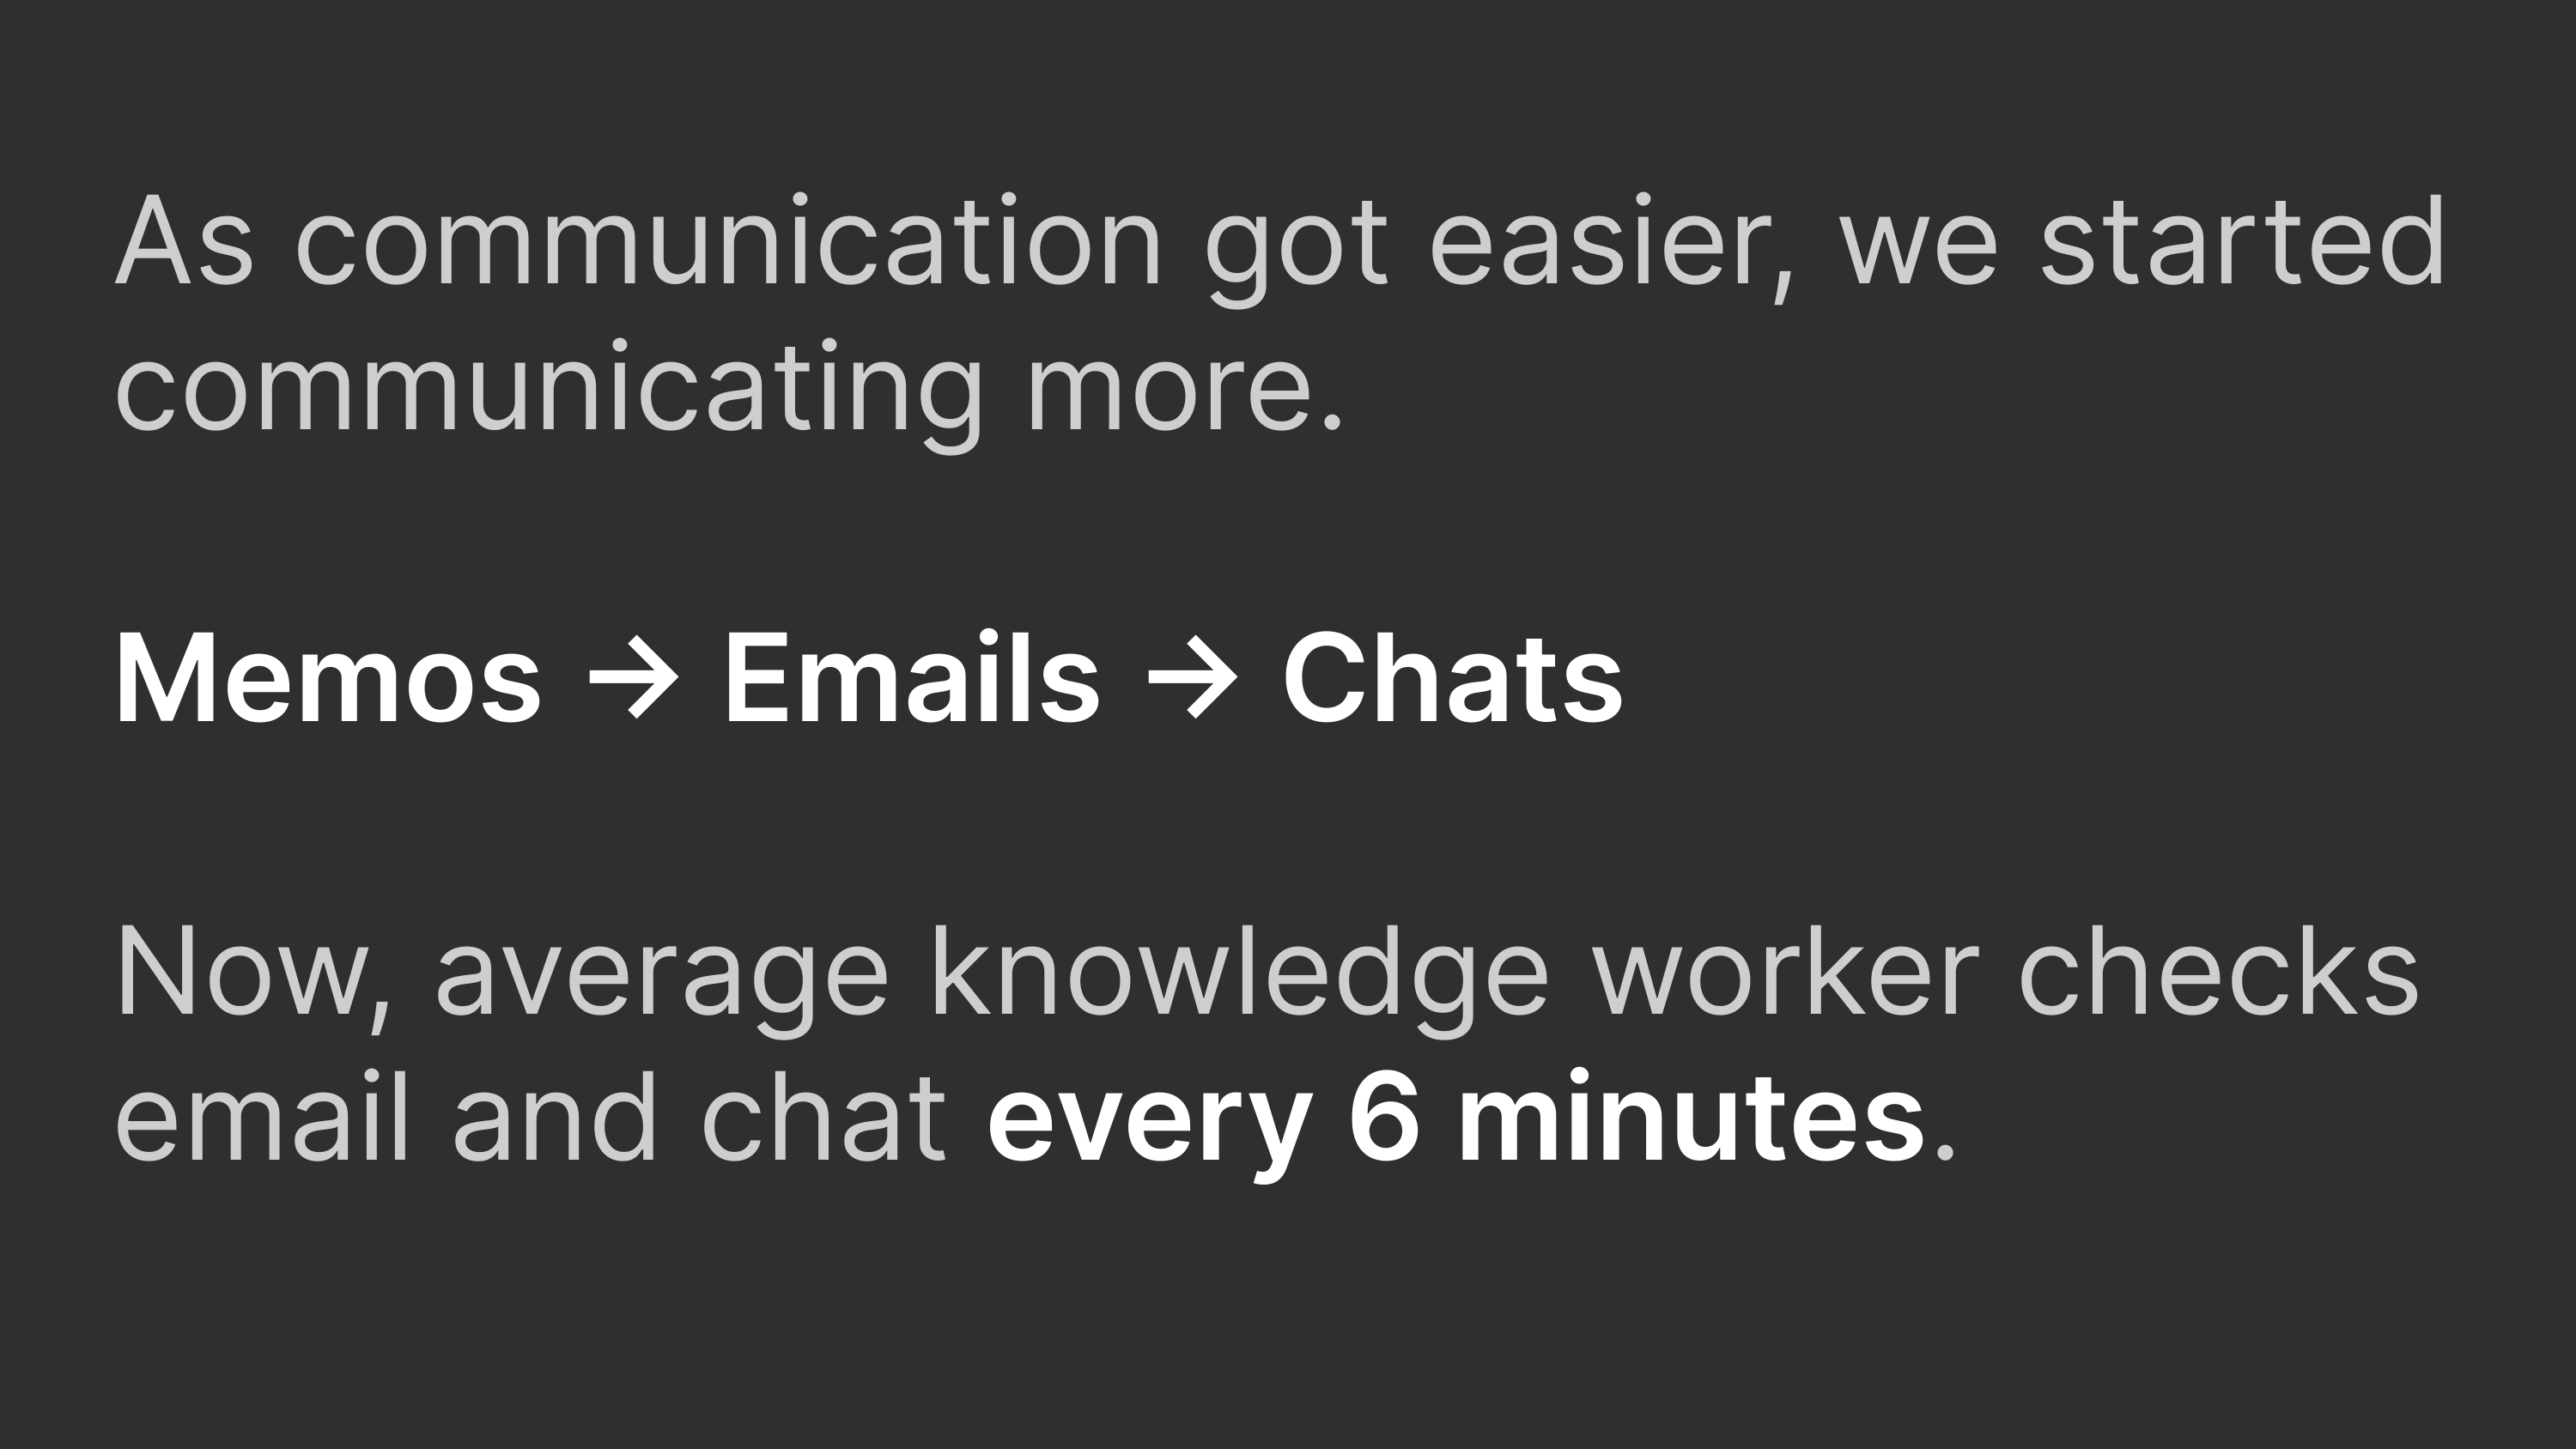 As communication got easier, we started communicating more. Memos, then emails, then chats. Now, average knowledge workers check email and chat every 6 minutes.